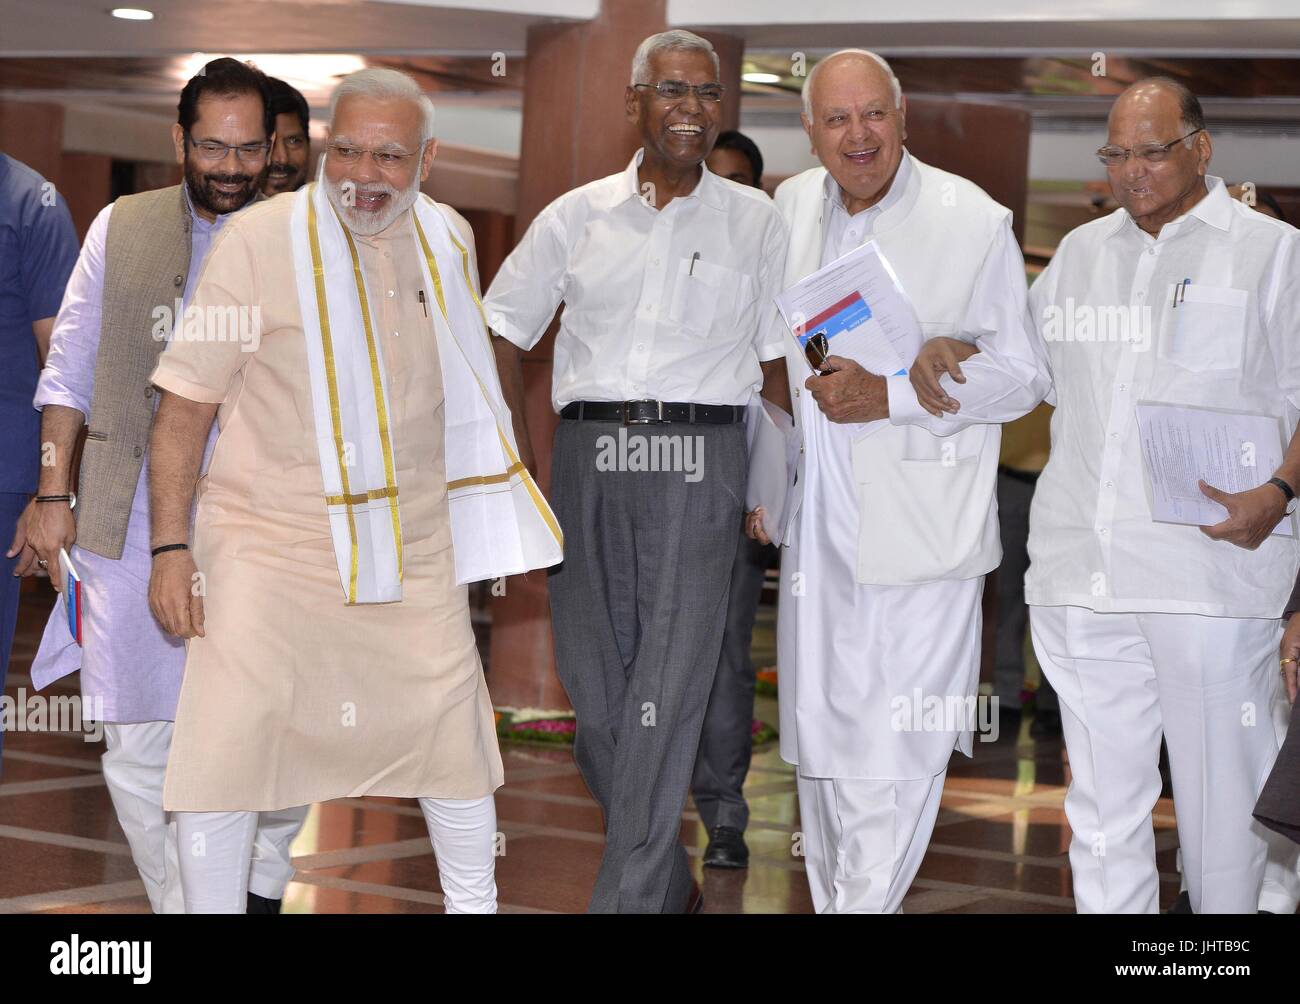 New Delhi, India. 16th July, 2017. Indian Prime Minister Narendra Modi (2nd L) attends a meeting with his cabinet colleagues at an all-party meeting ahead of monsoon session of Parliament in New Delhi, India, July 16, 2017. Credit: Partha Sarkar/Xinhua/Alamy Live News Stock Photo